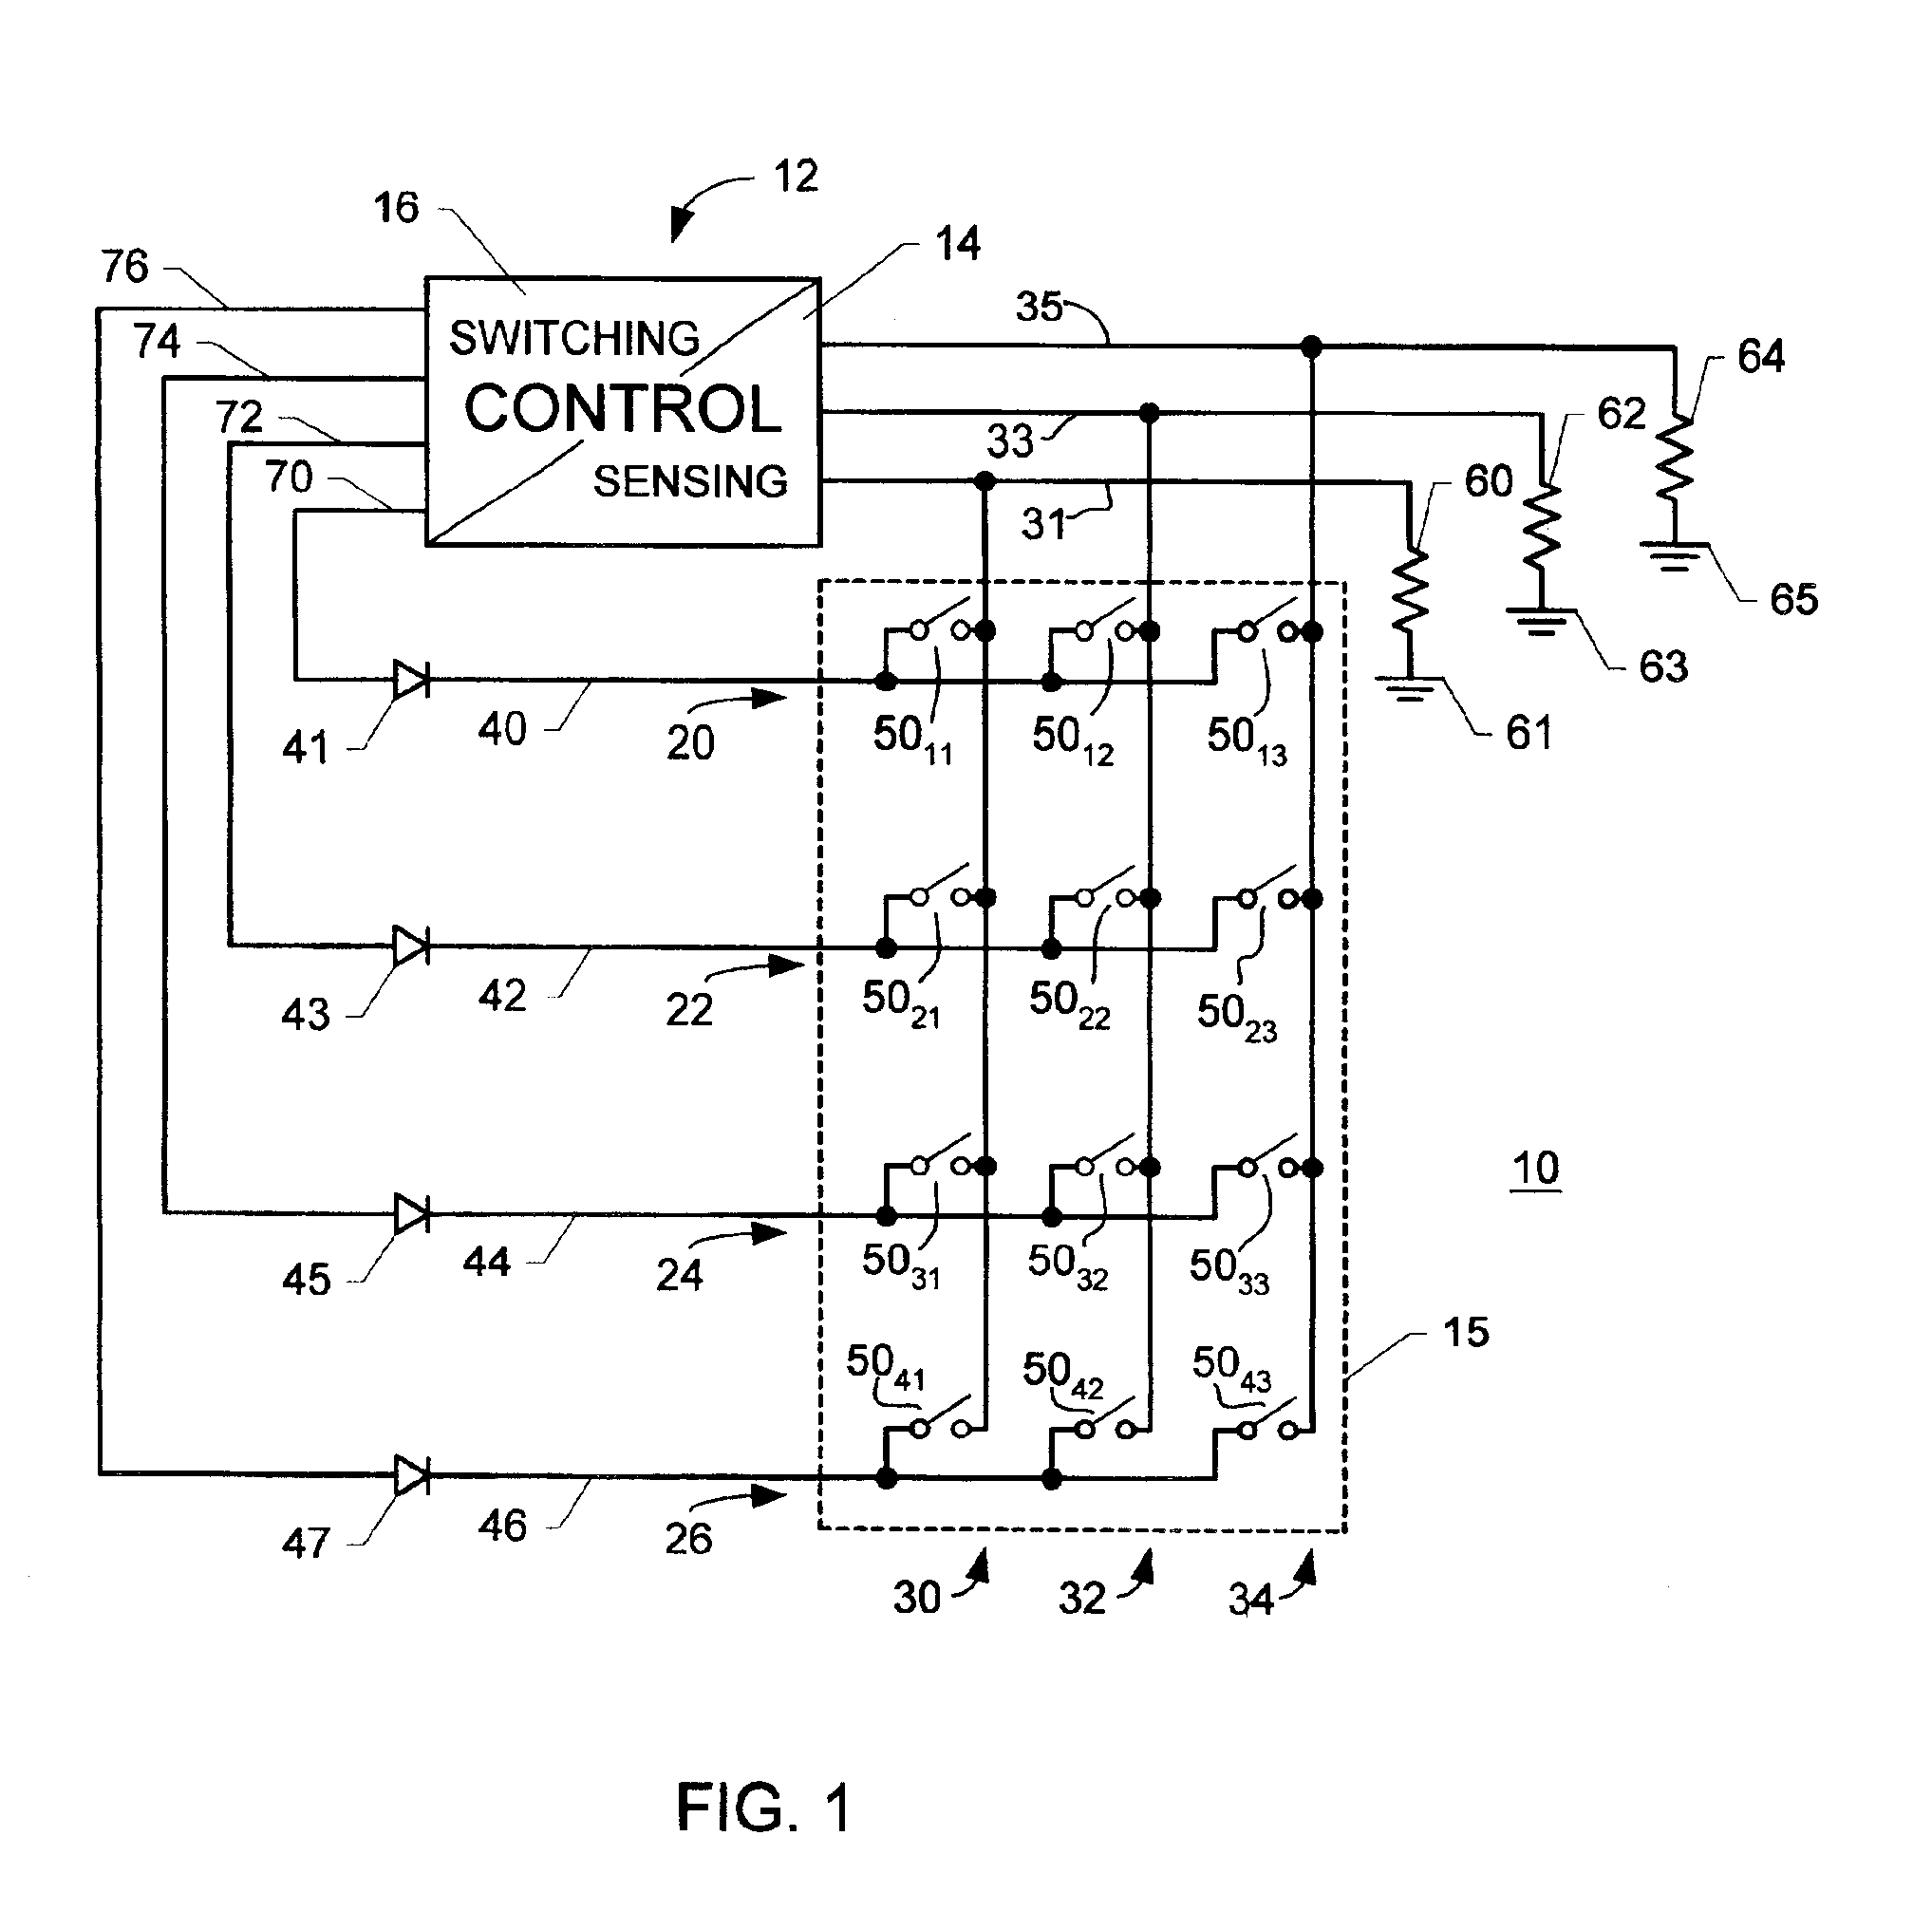 Apparatus and method for controlling an electrical switch array